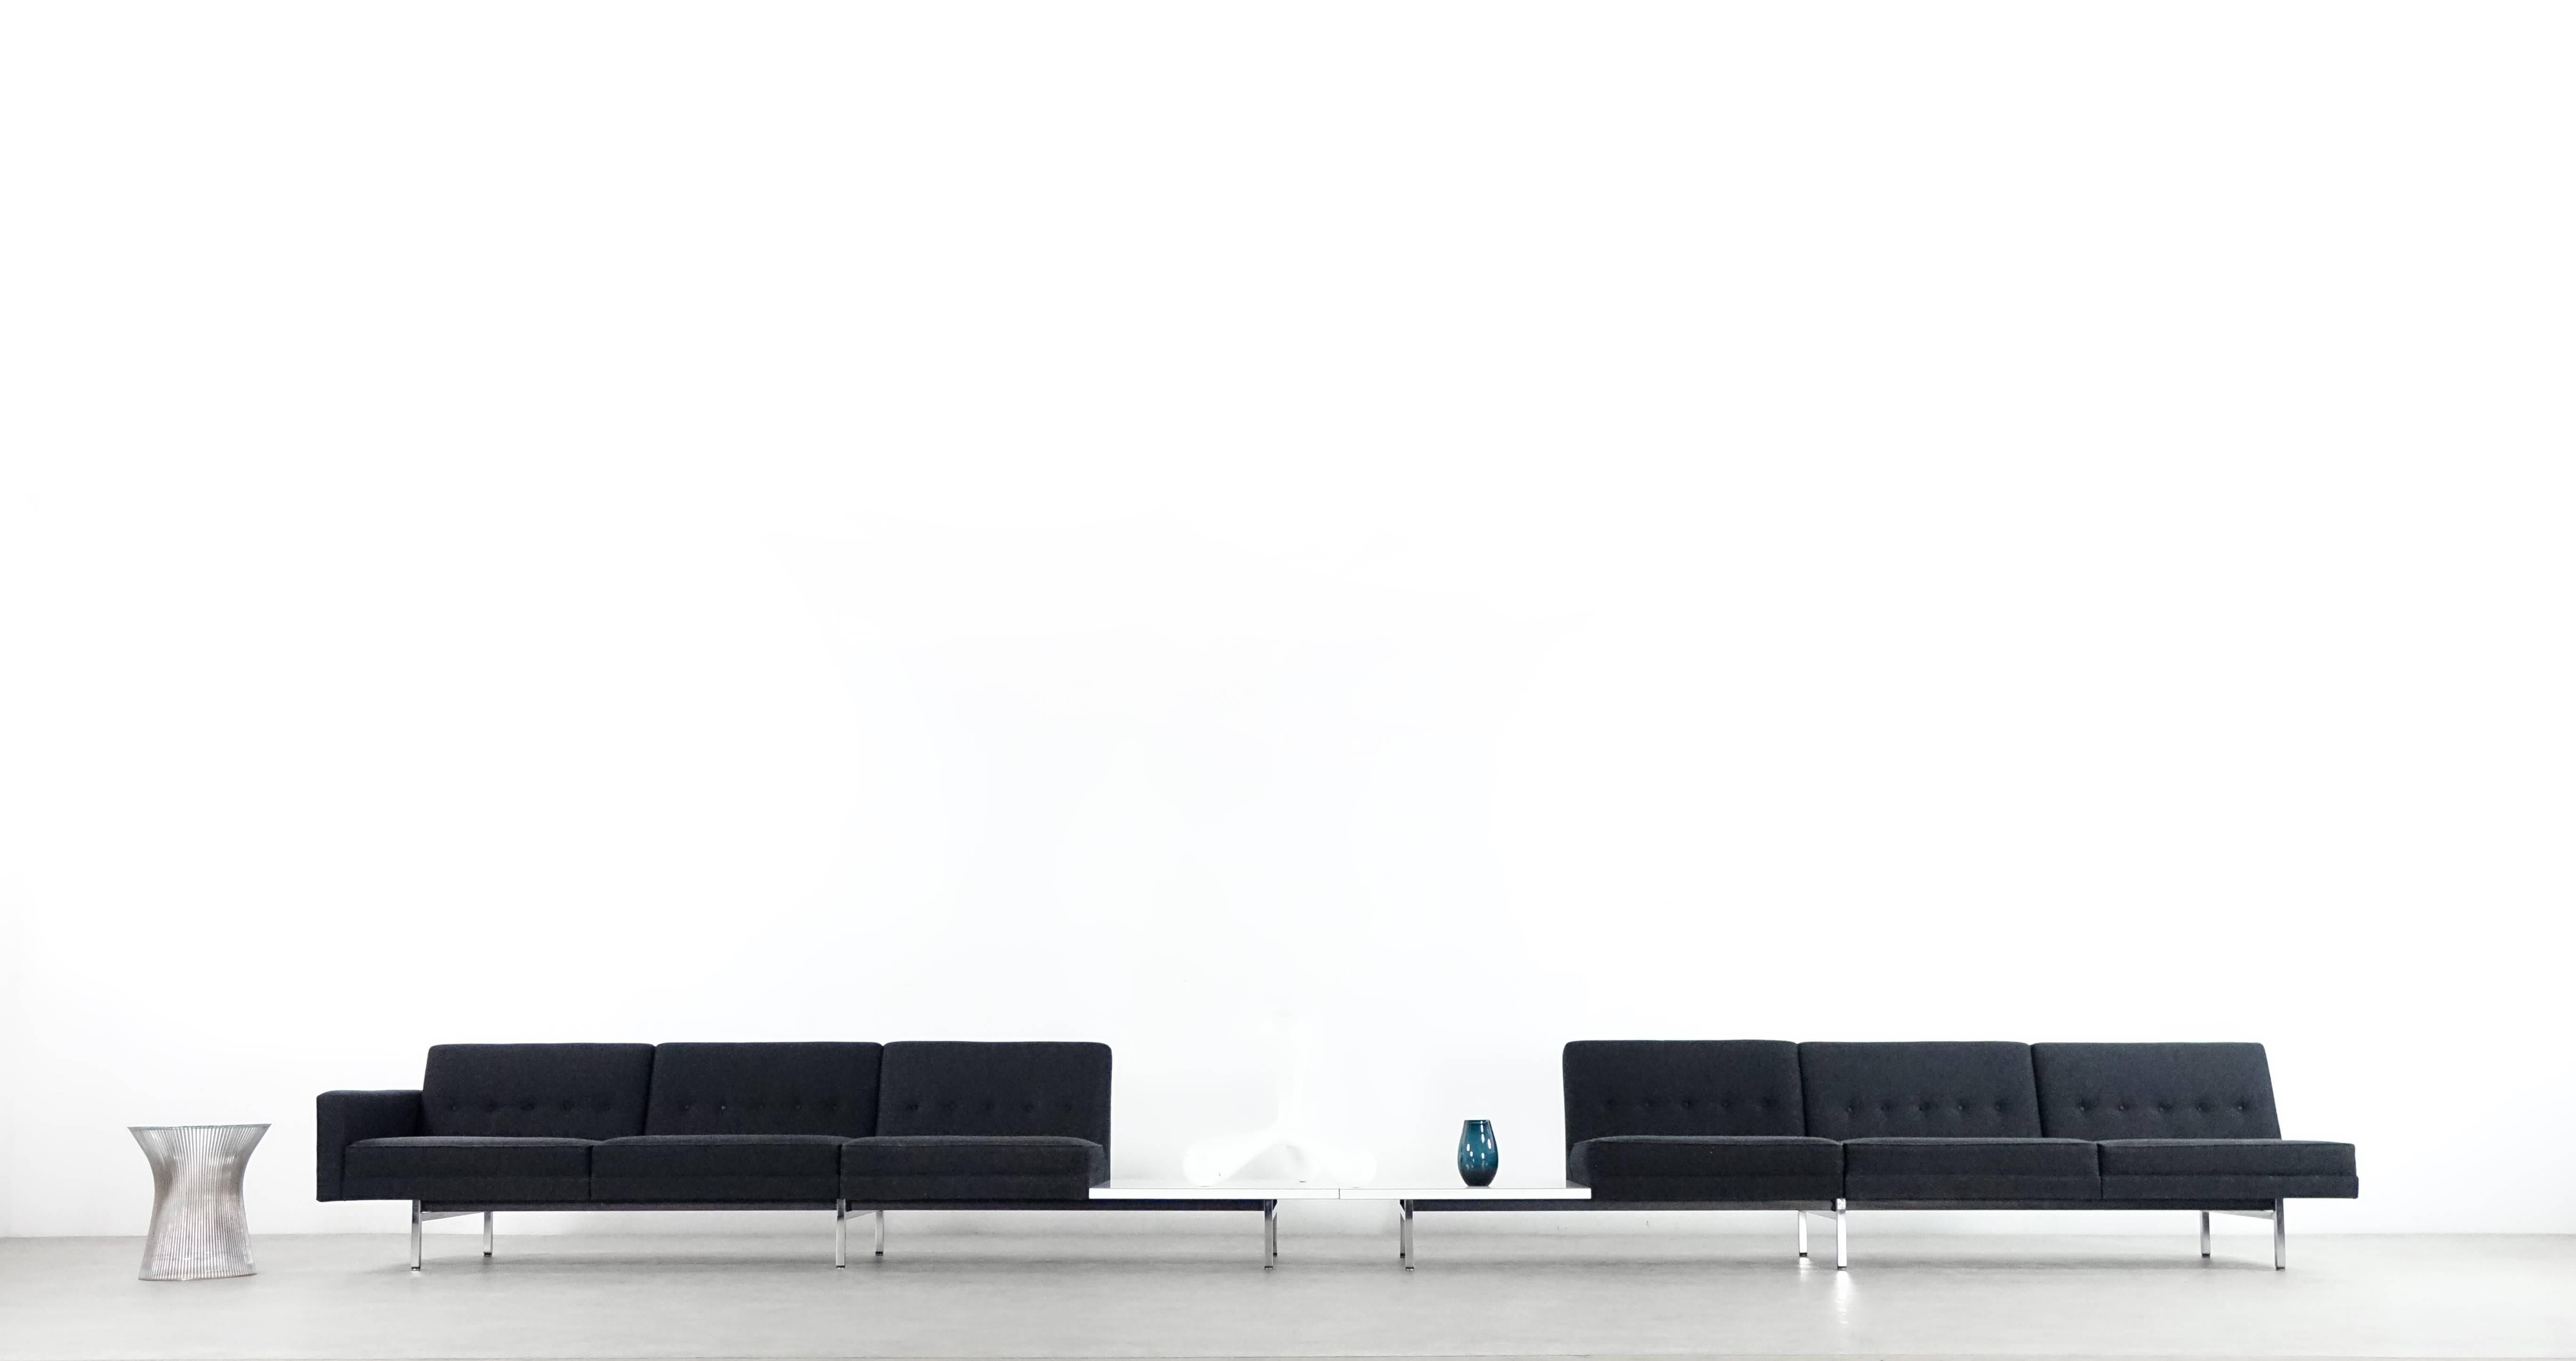 Mid-Century Modern Modular System Seating Suite Sofa by George Nelson for Herman Miller Perfect